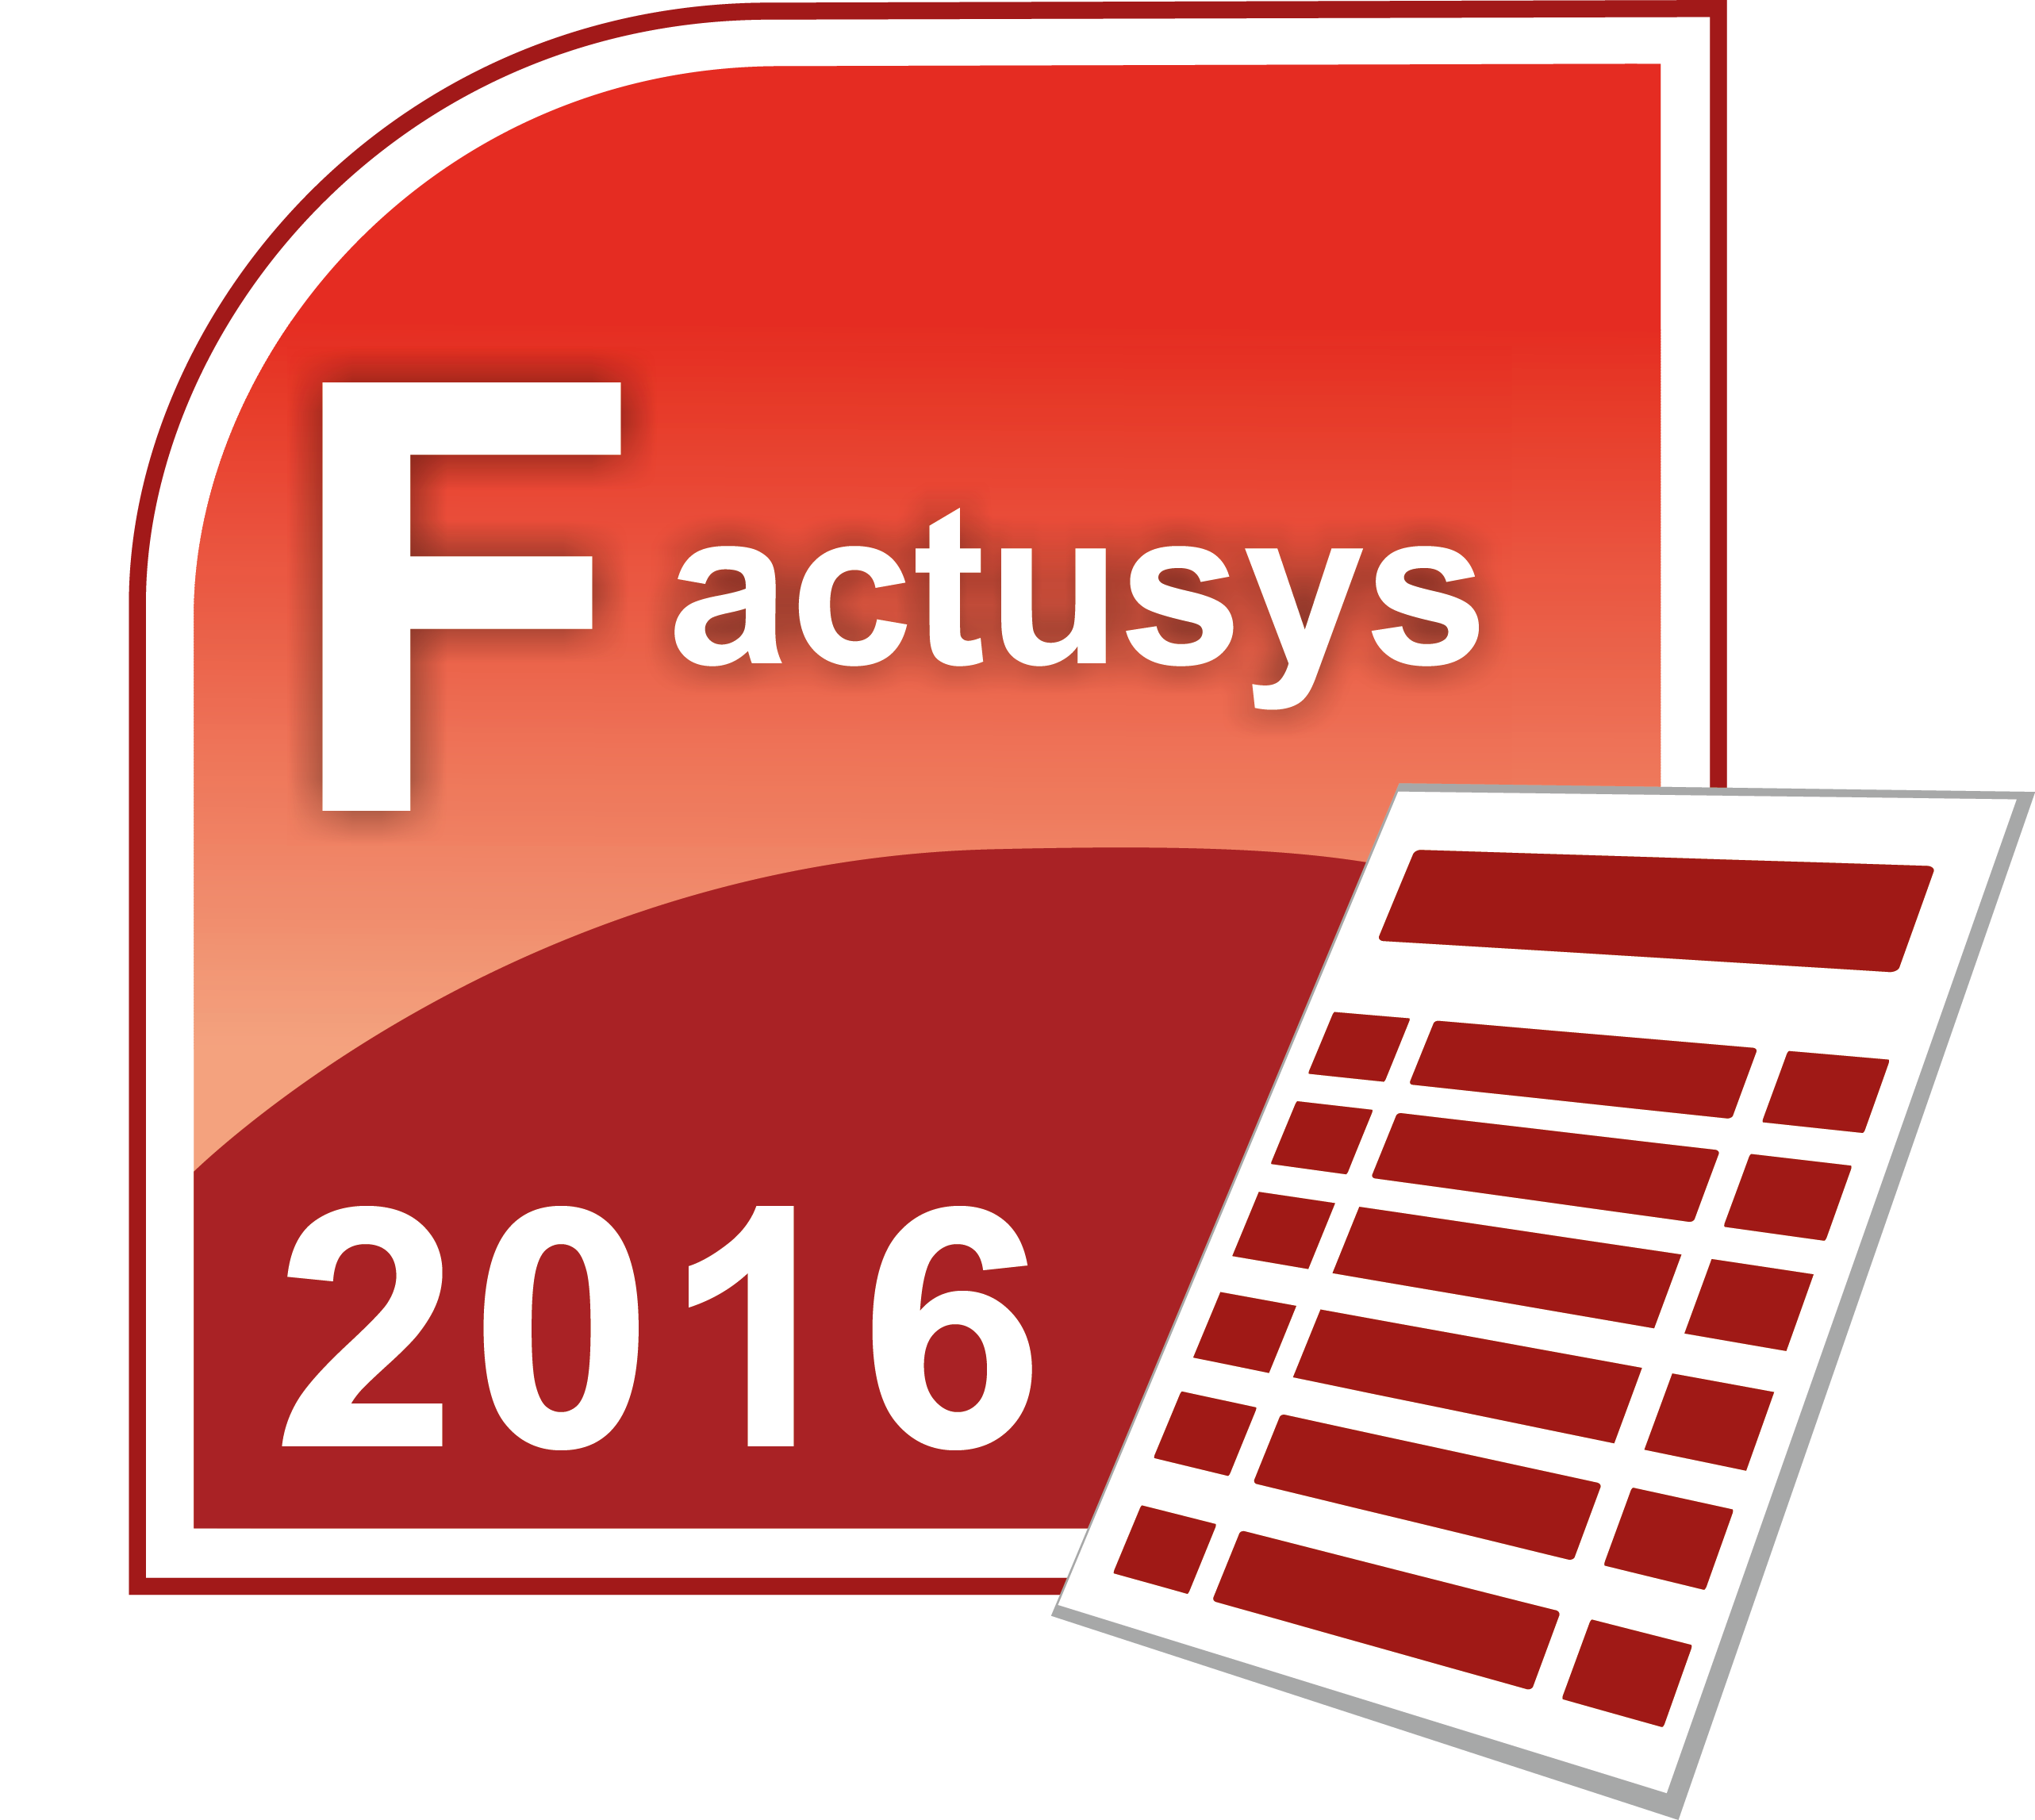 Icono_SoftwareFACTUSYS_2016.png - 297.91 kB